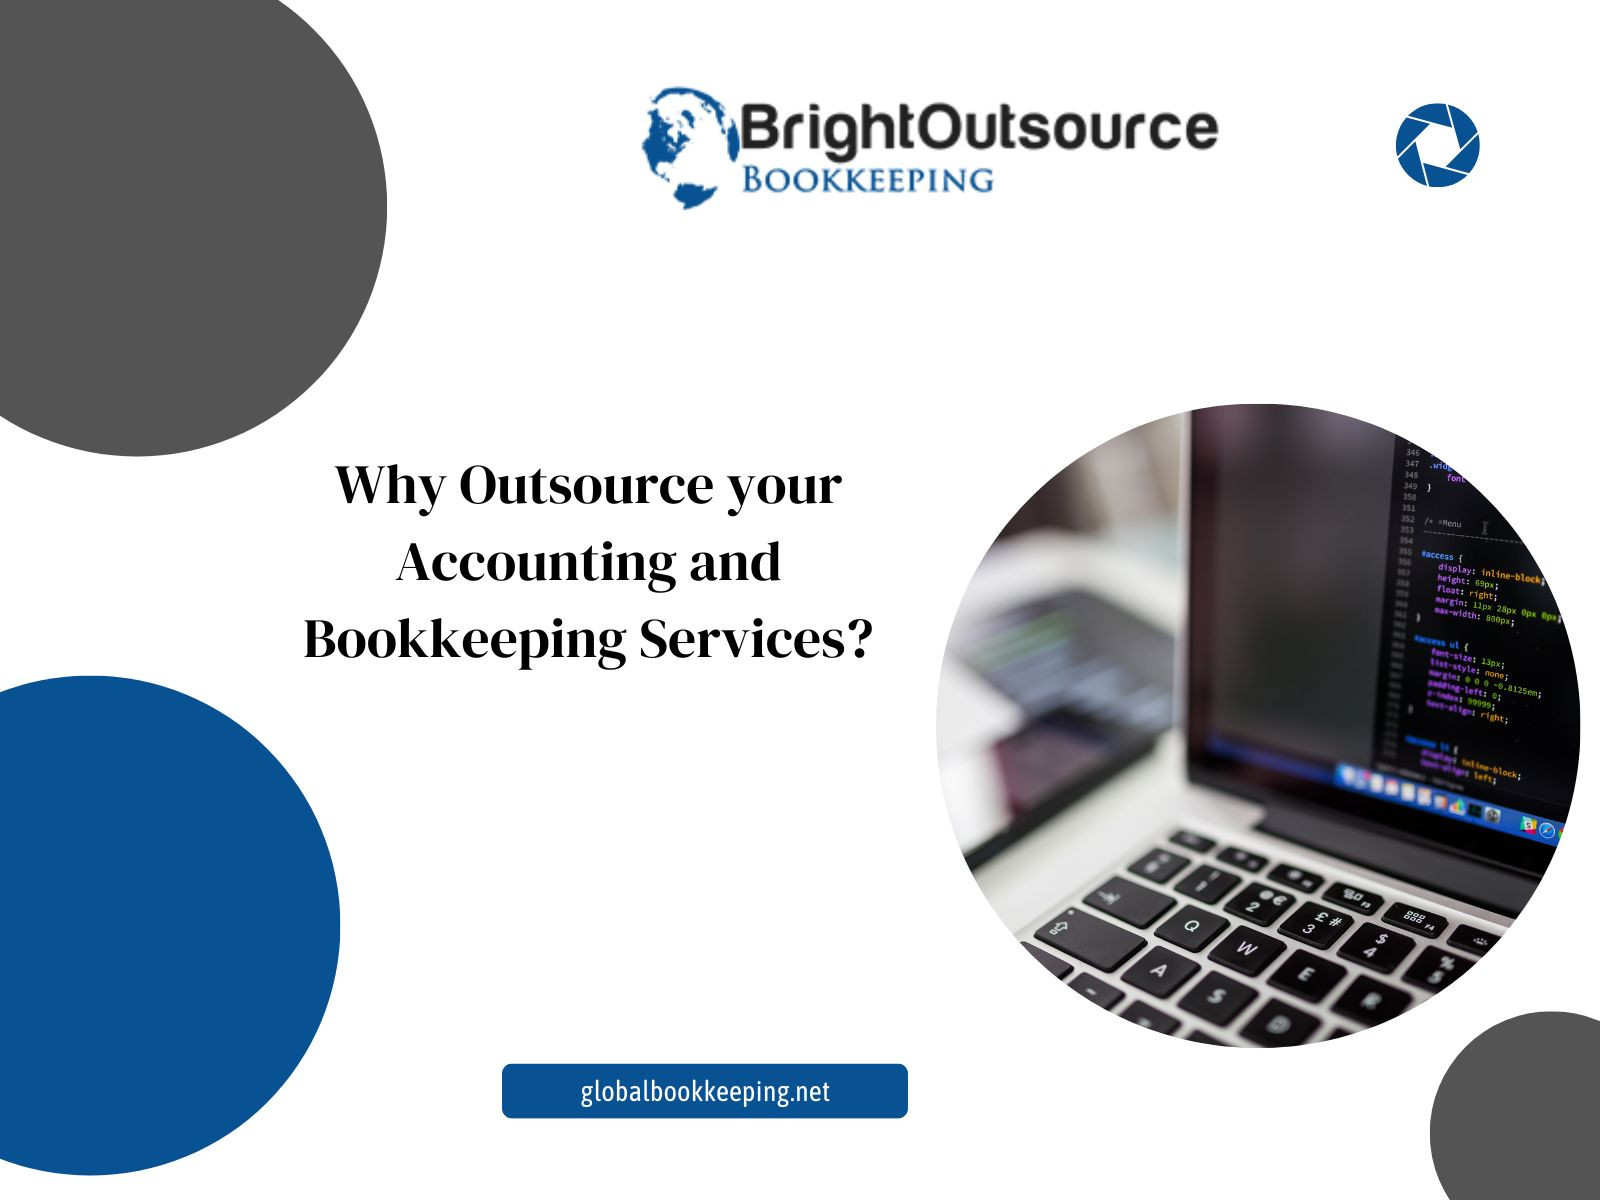 Why Outsource Accounting and Bookkeeping Services?